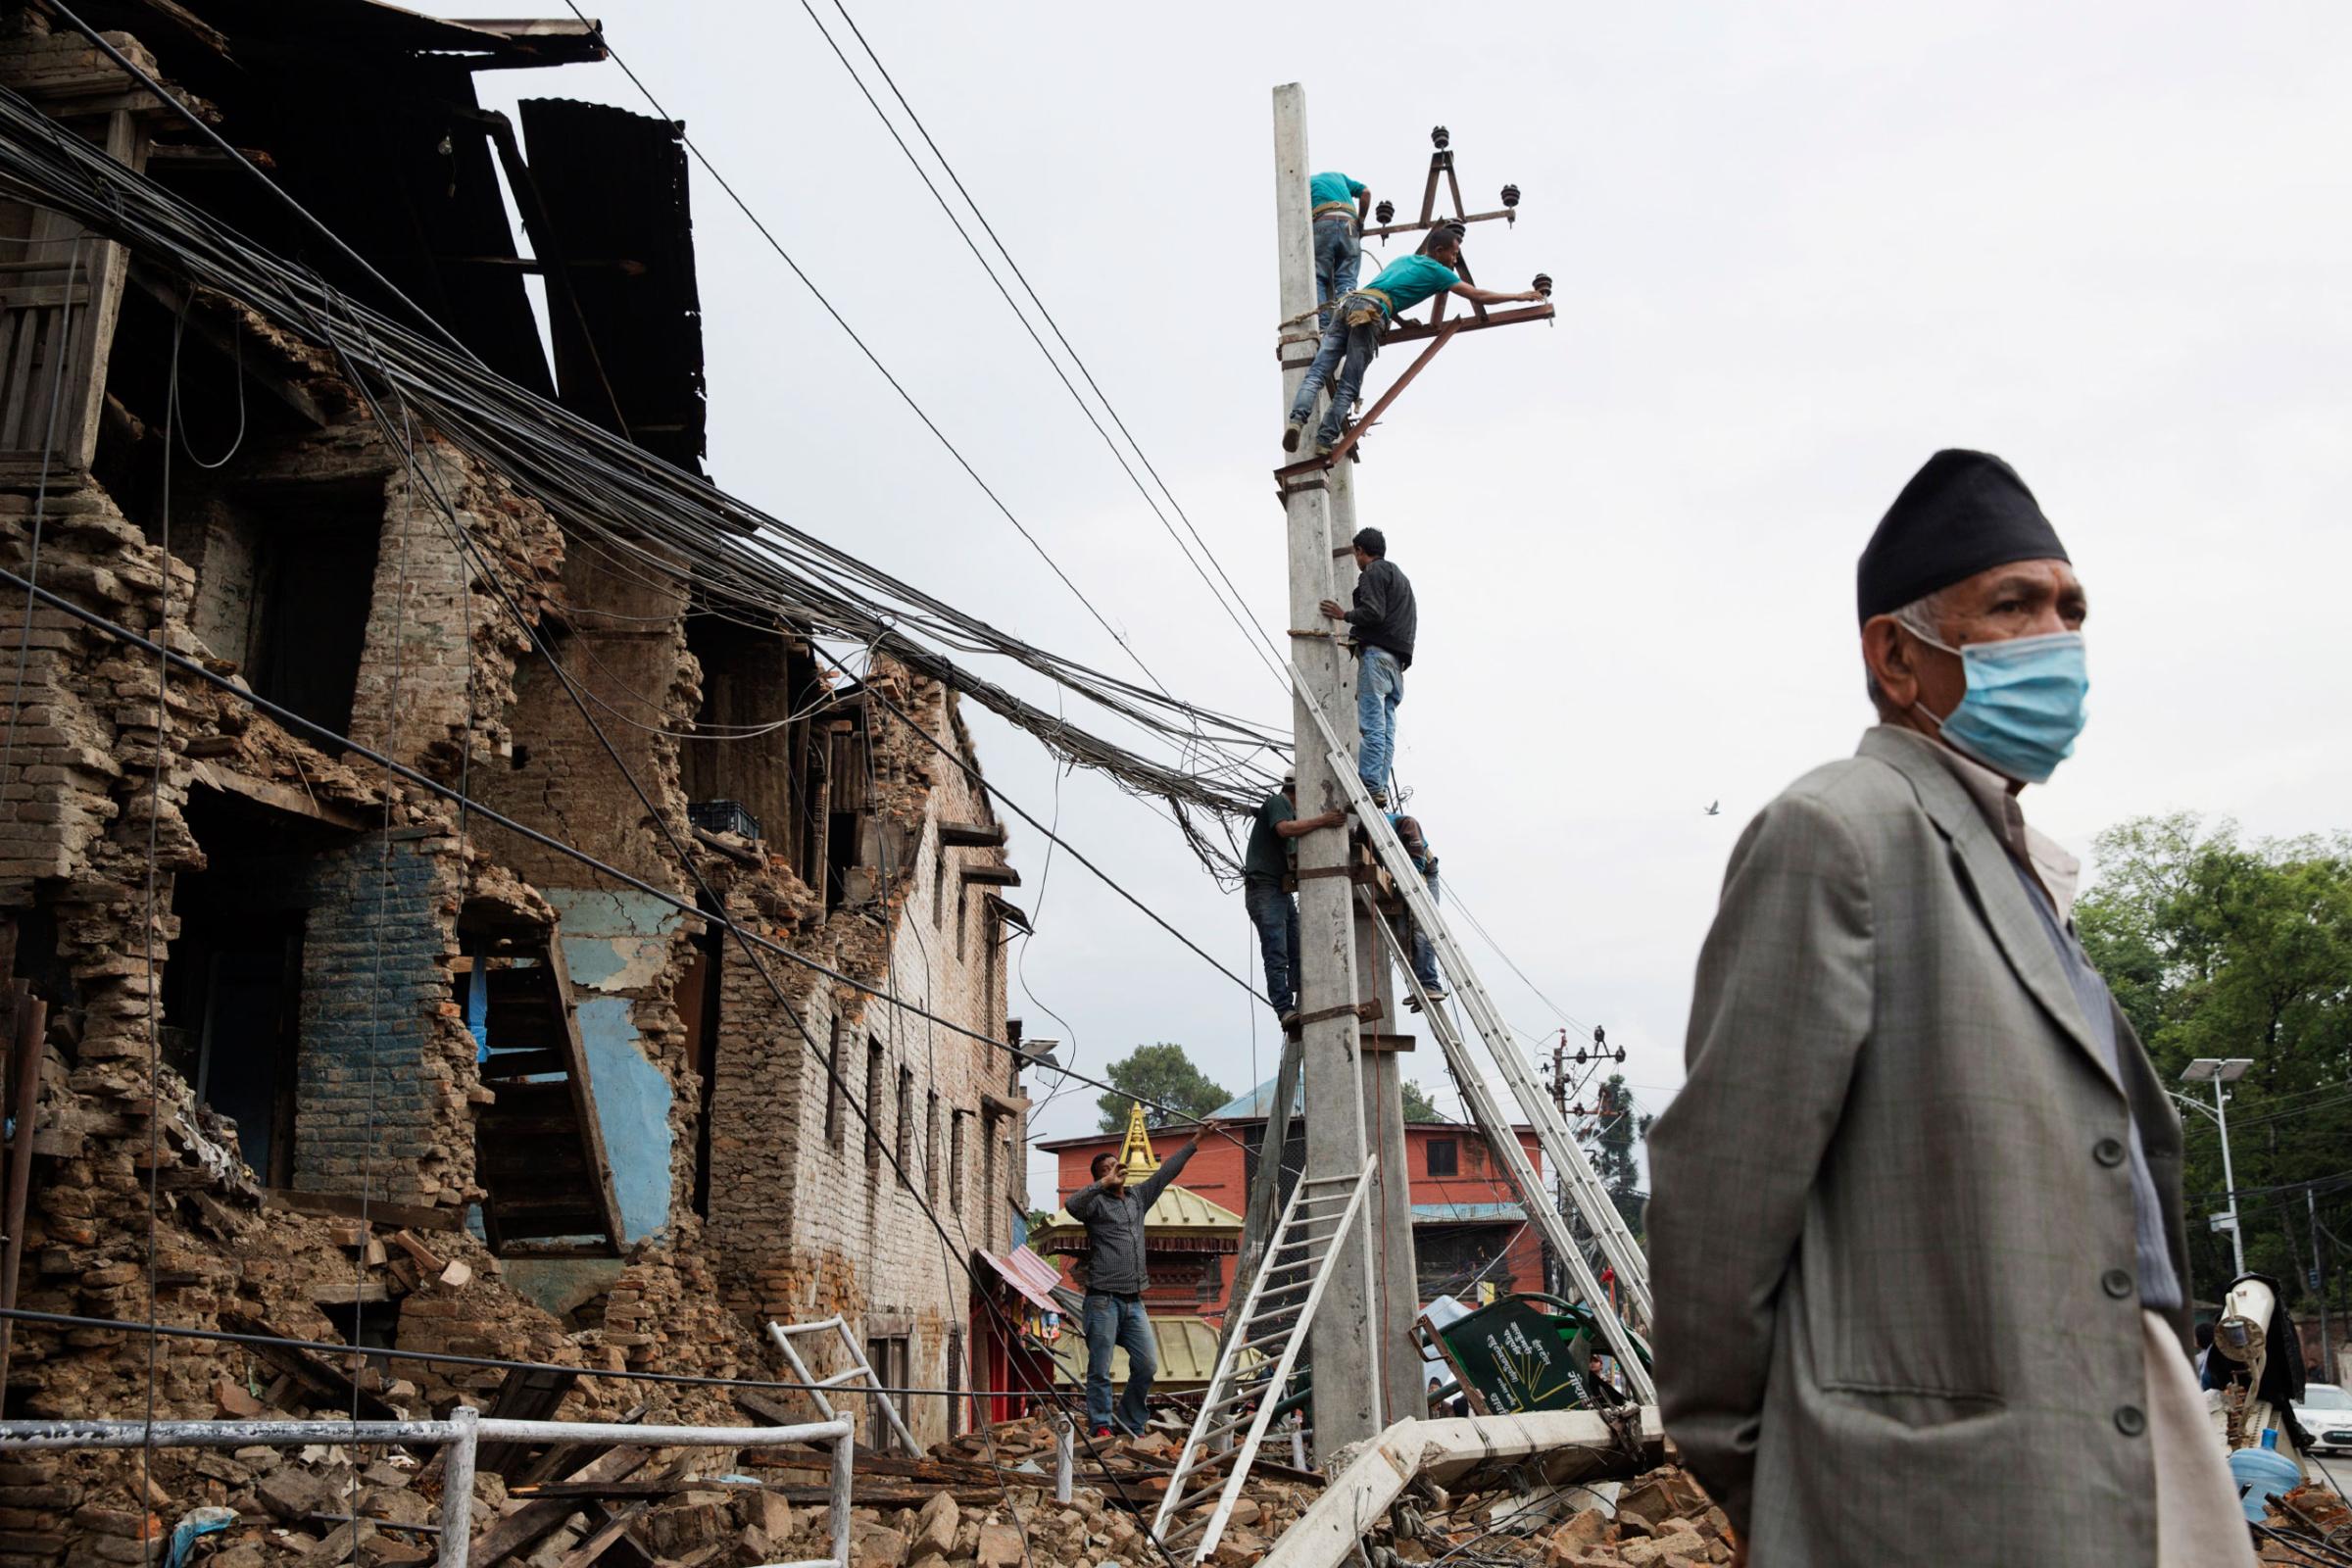 Workers repair power lines in Kathmandu, Nepal on April. 28, 2015. Nepal had a severe earthquake on April 25th. Photo by Adam Ferguson for Time